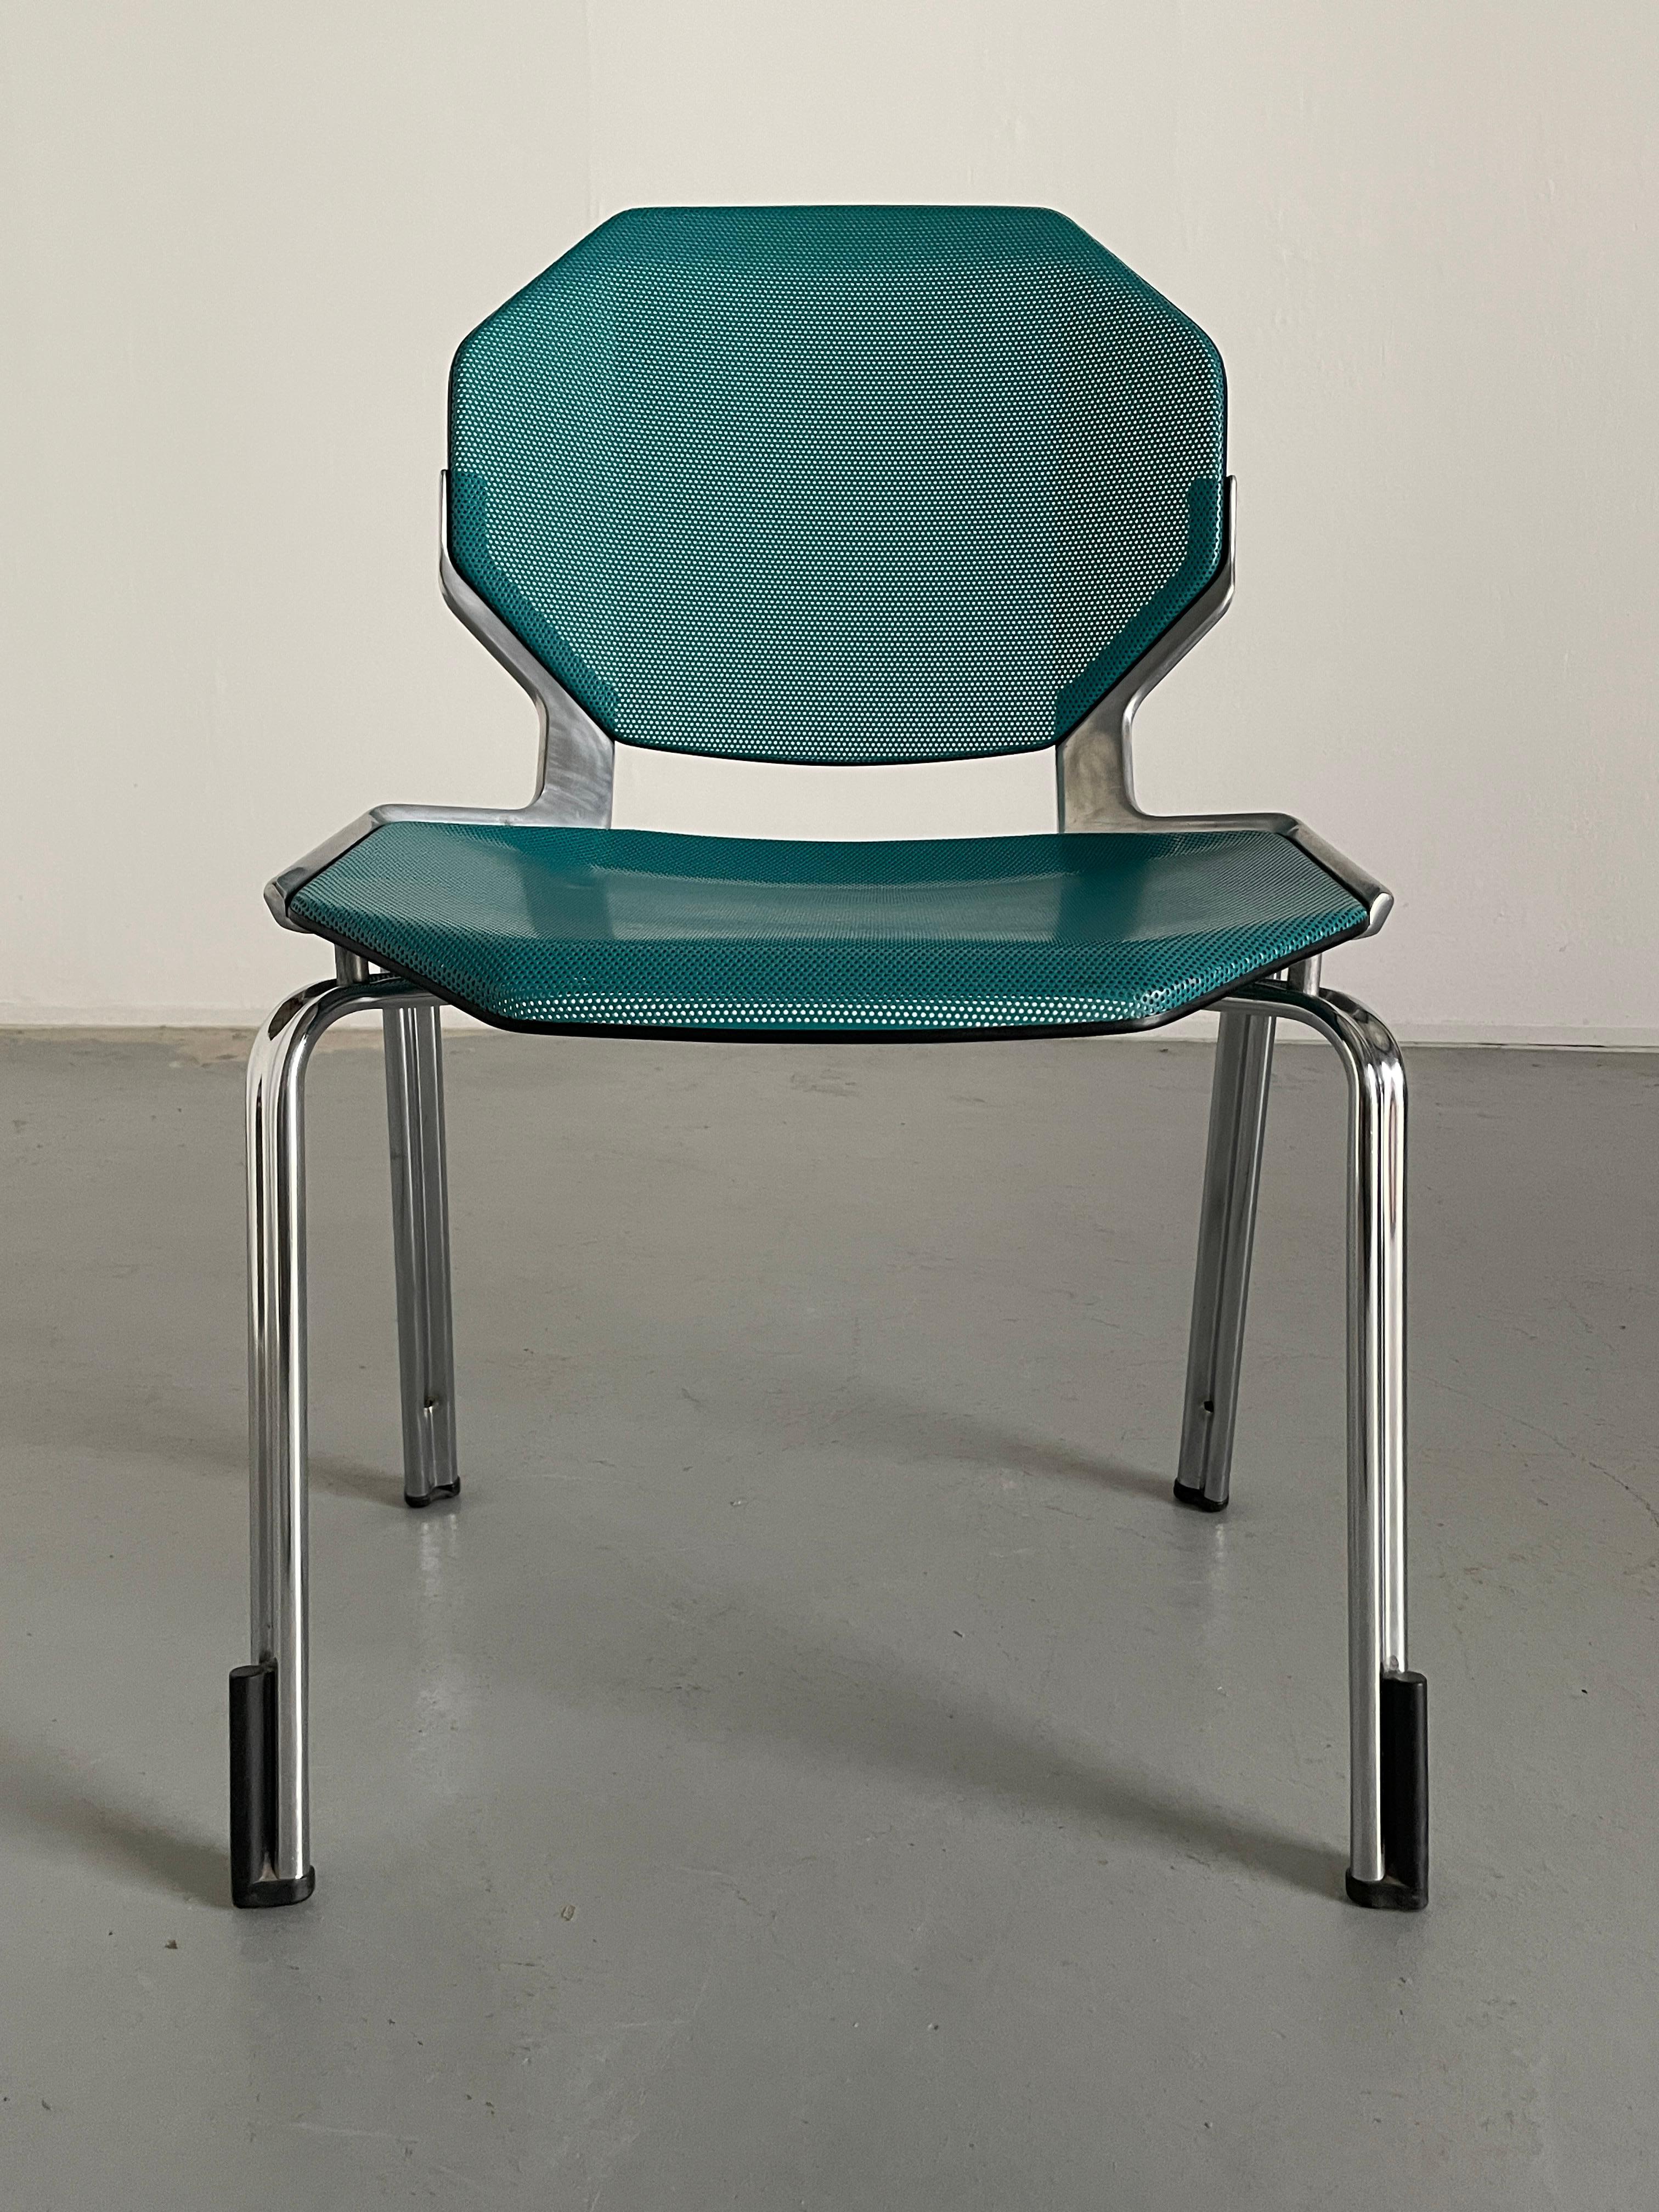 Space Age Futuristic Octagonal Stackable Dining Chairs by Fröscher Sitform, 90s For Sale 2